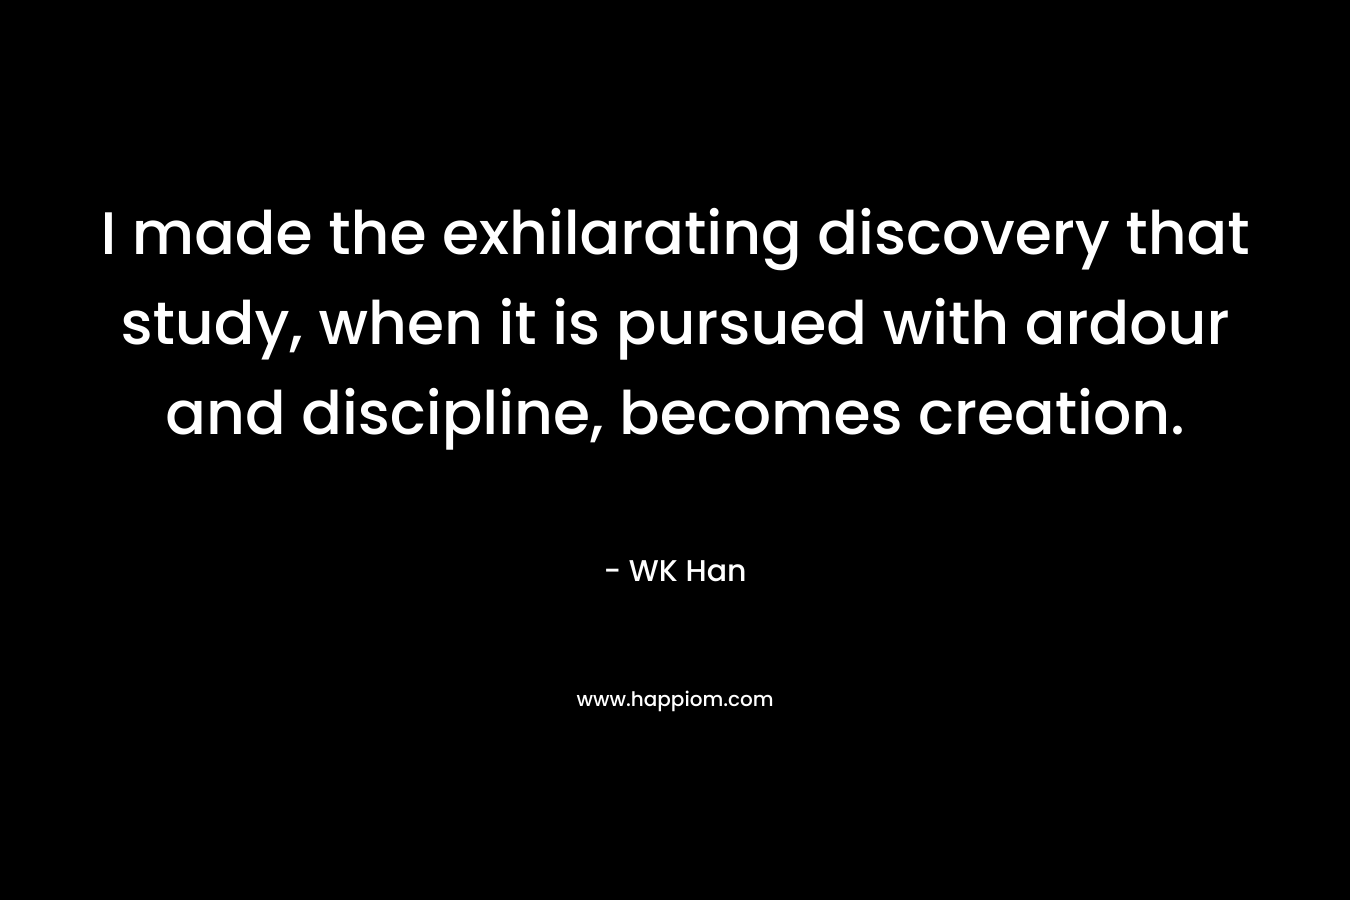 I made the exhilarating discovery that study, when it is pursued with ardour and discipline, becomes creation. – WK Han